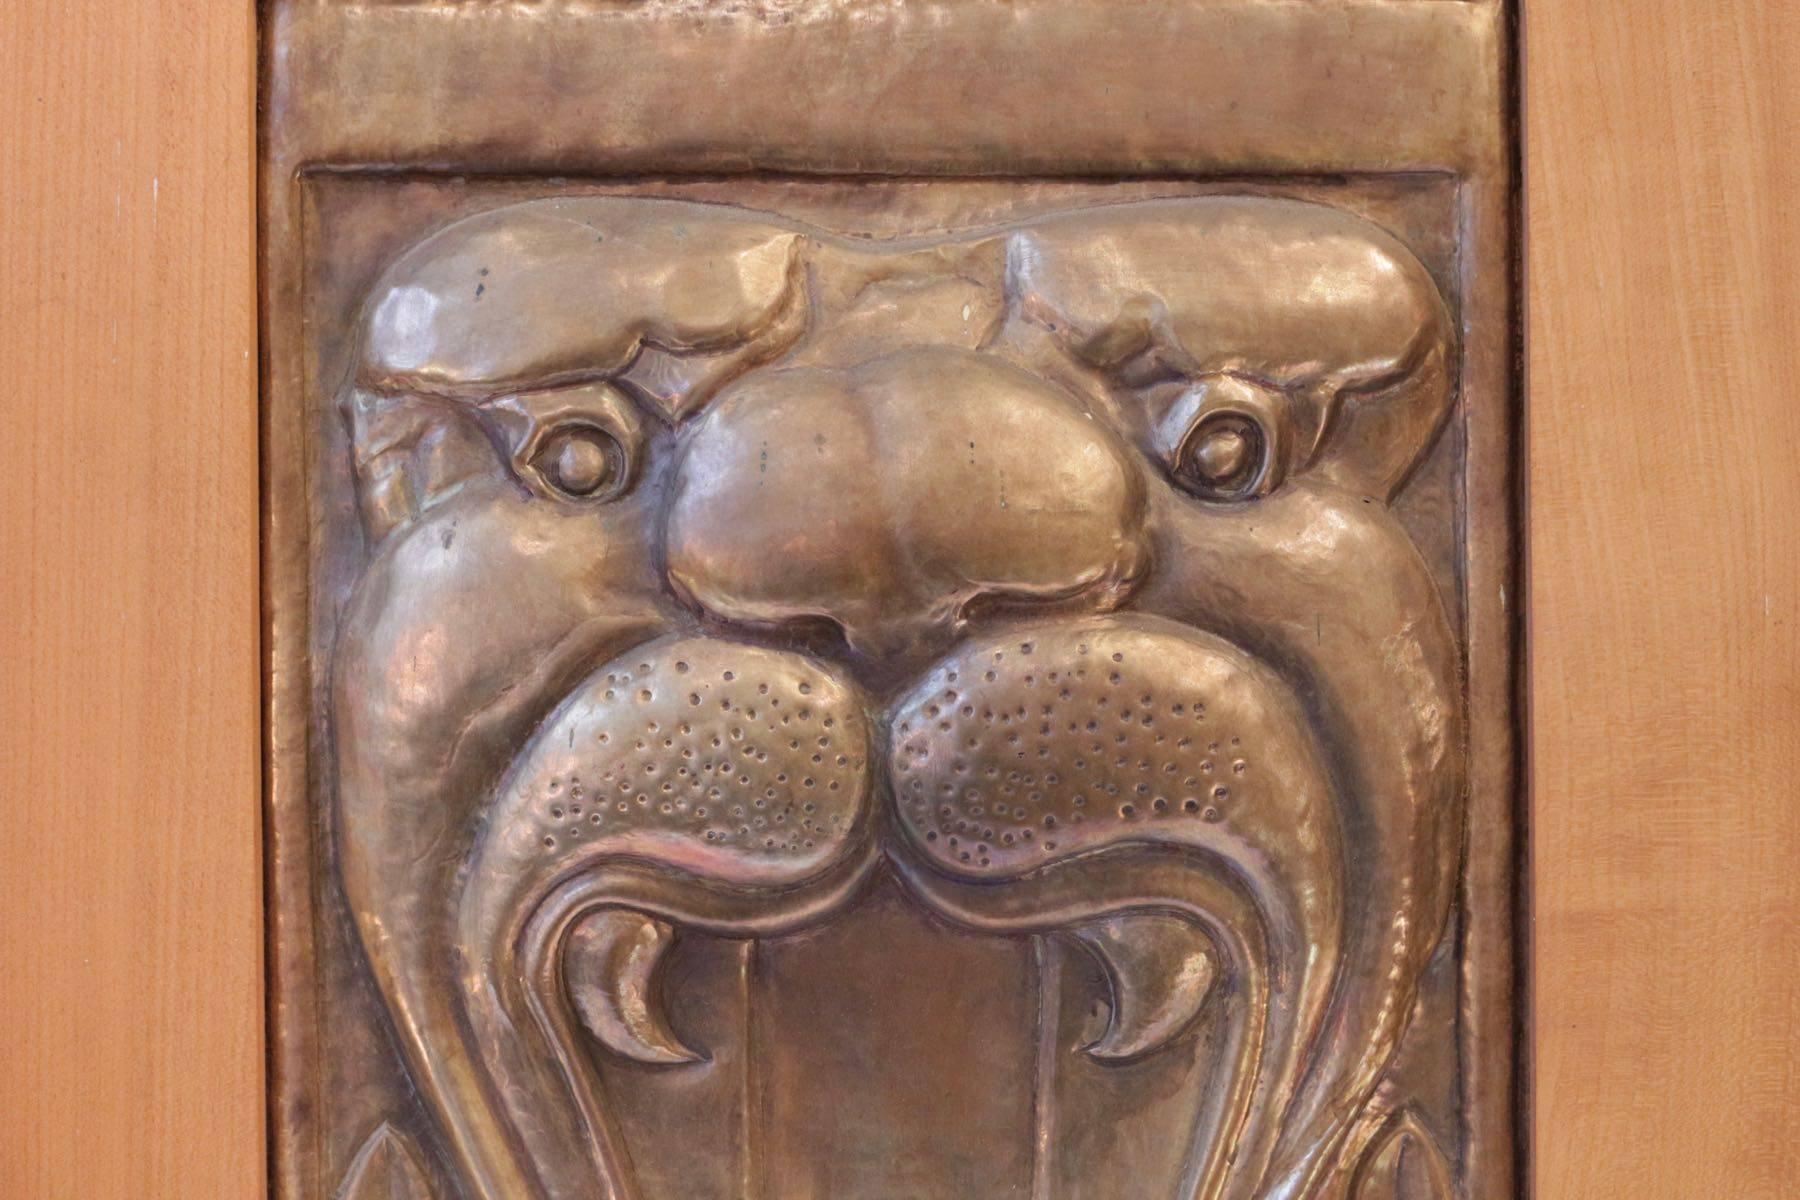 Fabulous decorative element (part of door), Tiger, circa 1915.
Brass or copper,
not signed,
in the manner of Majorelle.